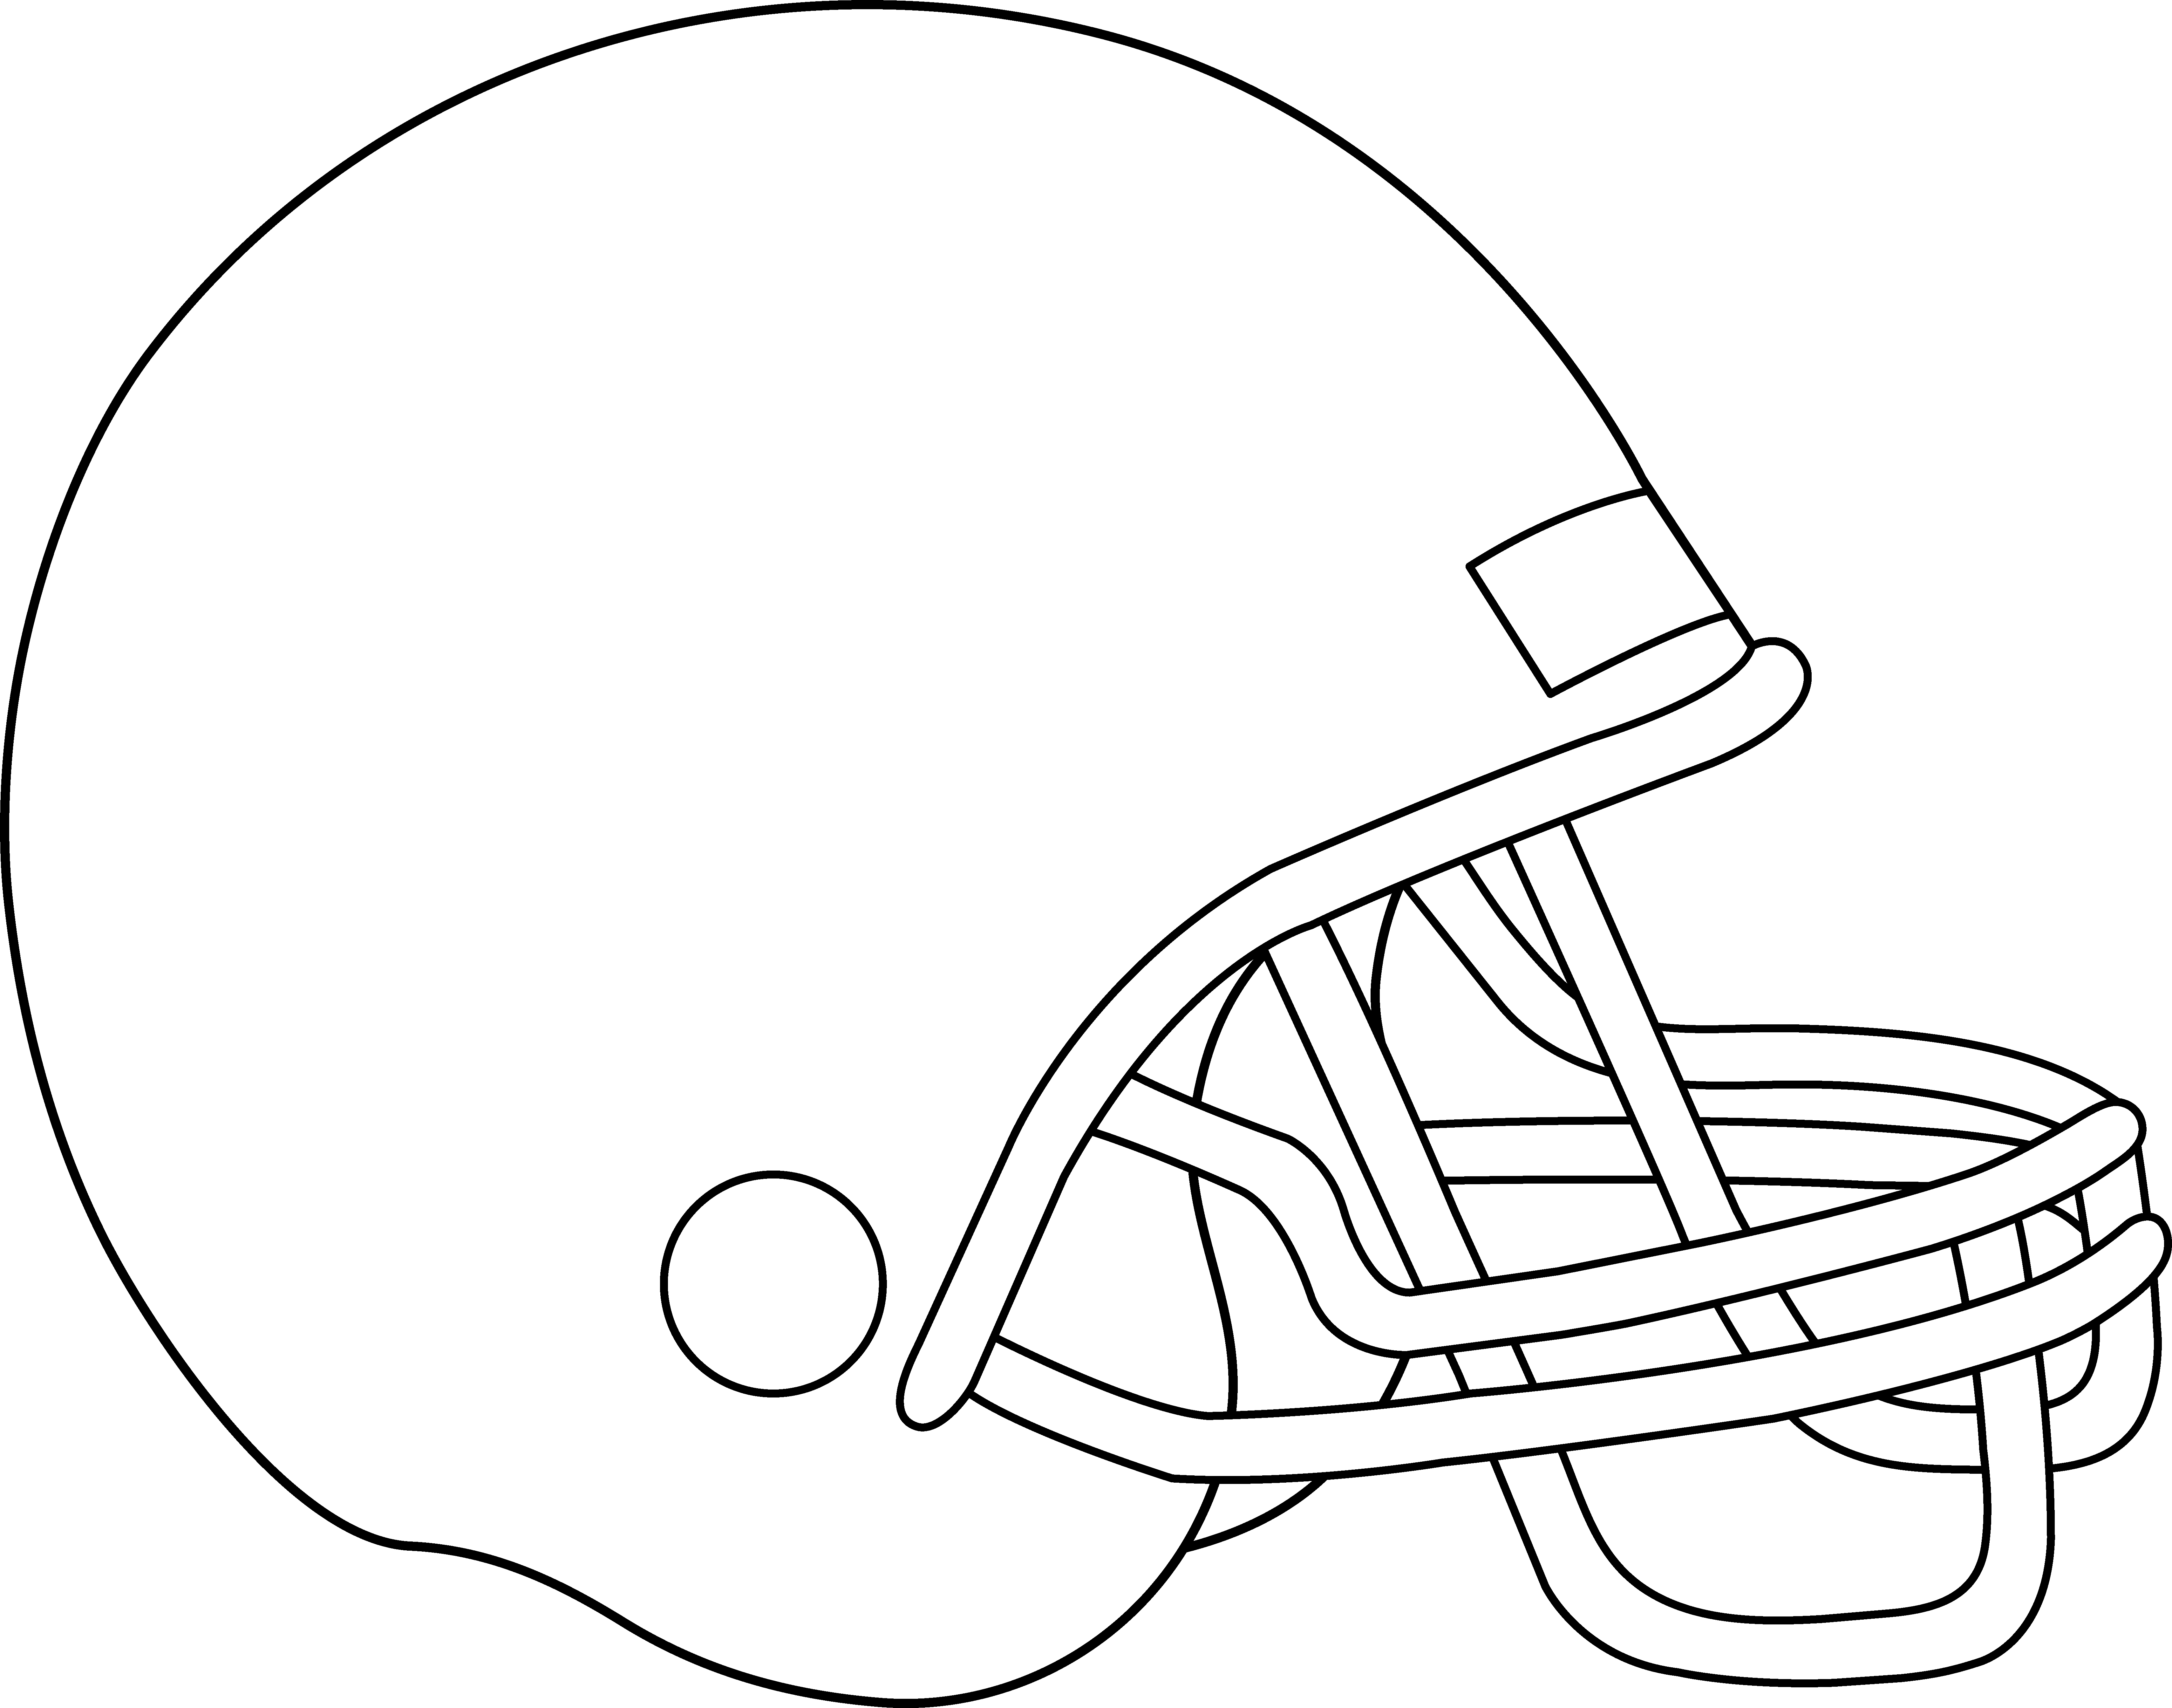  collection of american. White clipart football